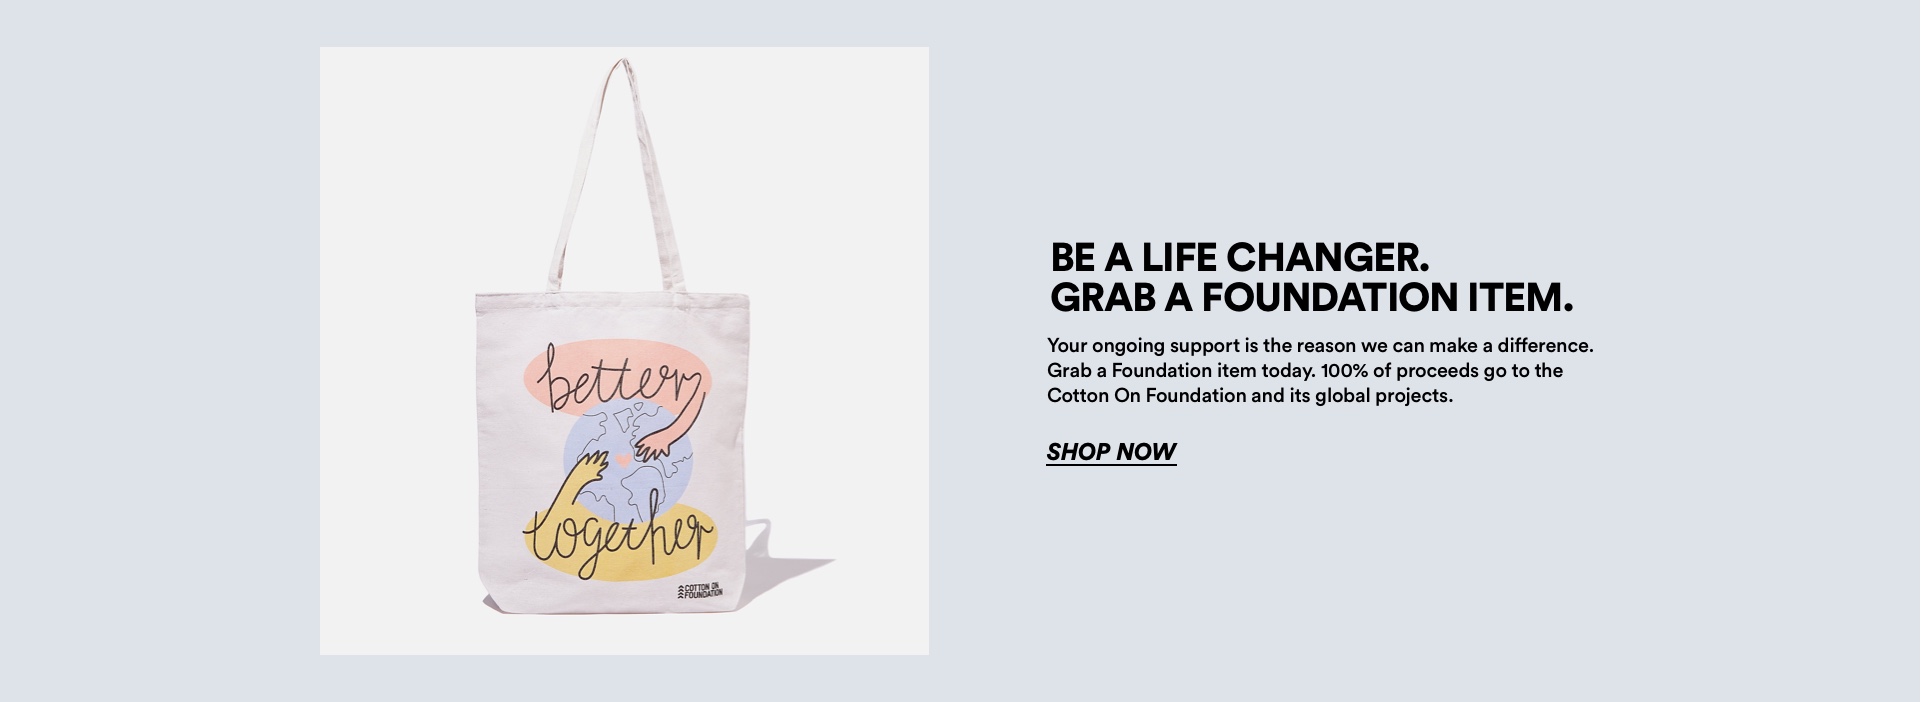 Be a life changer. Shop Now.